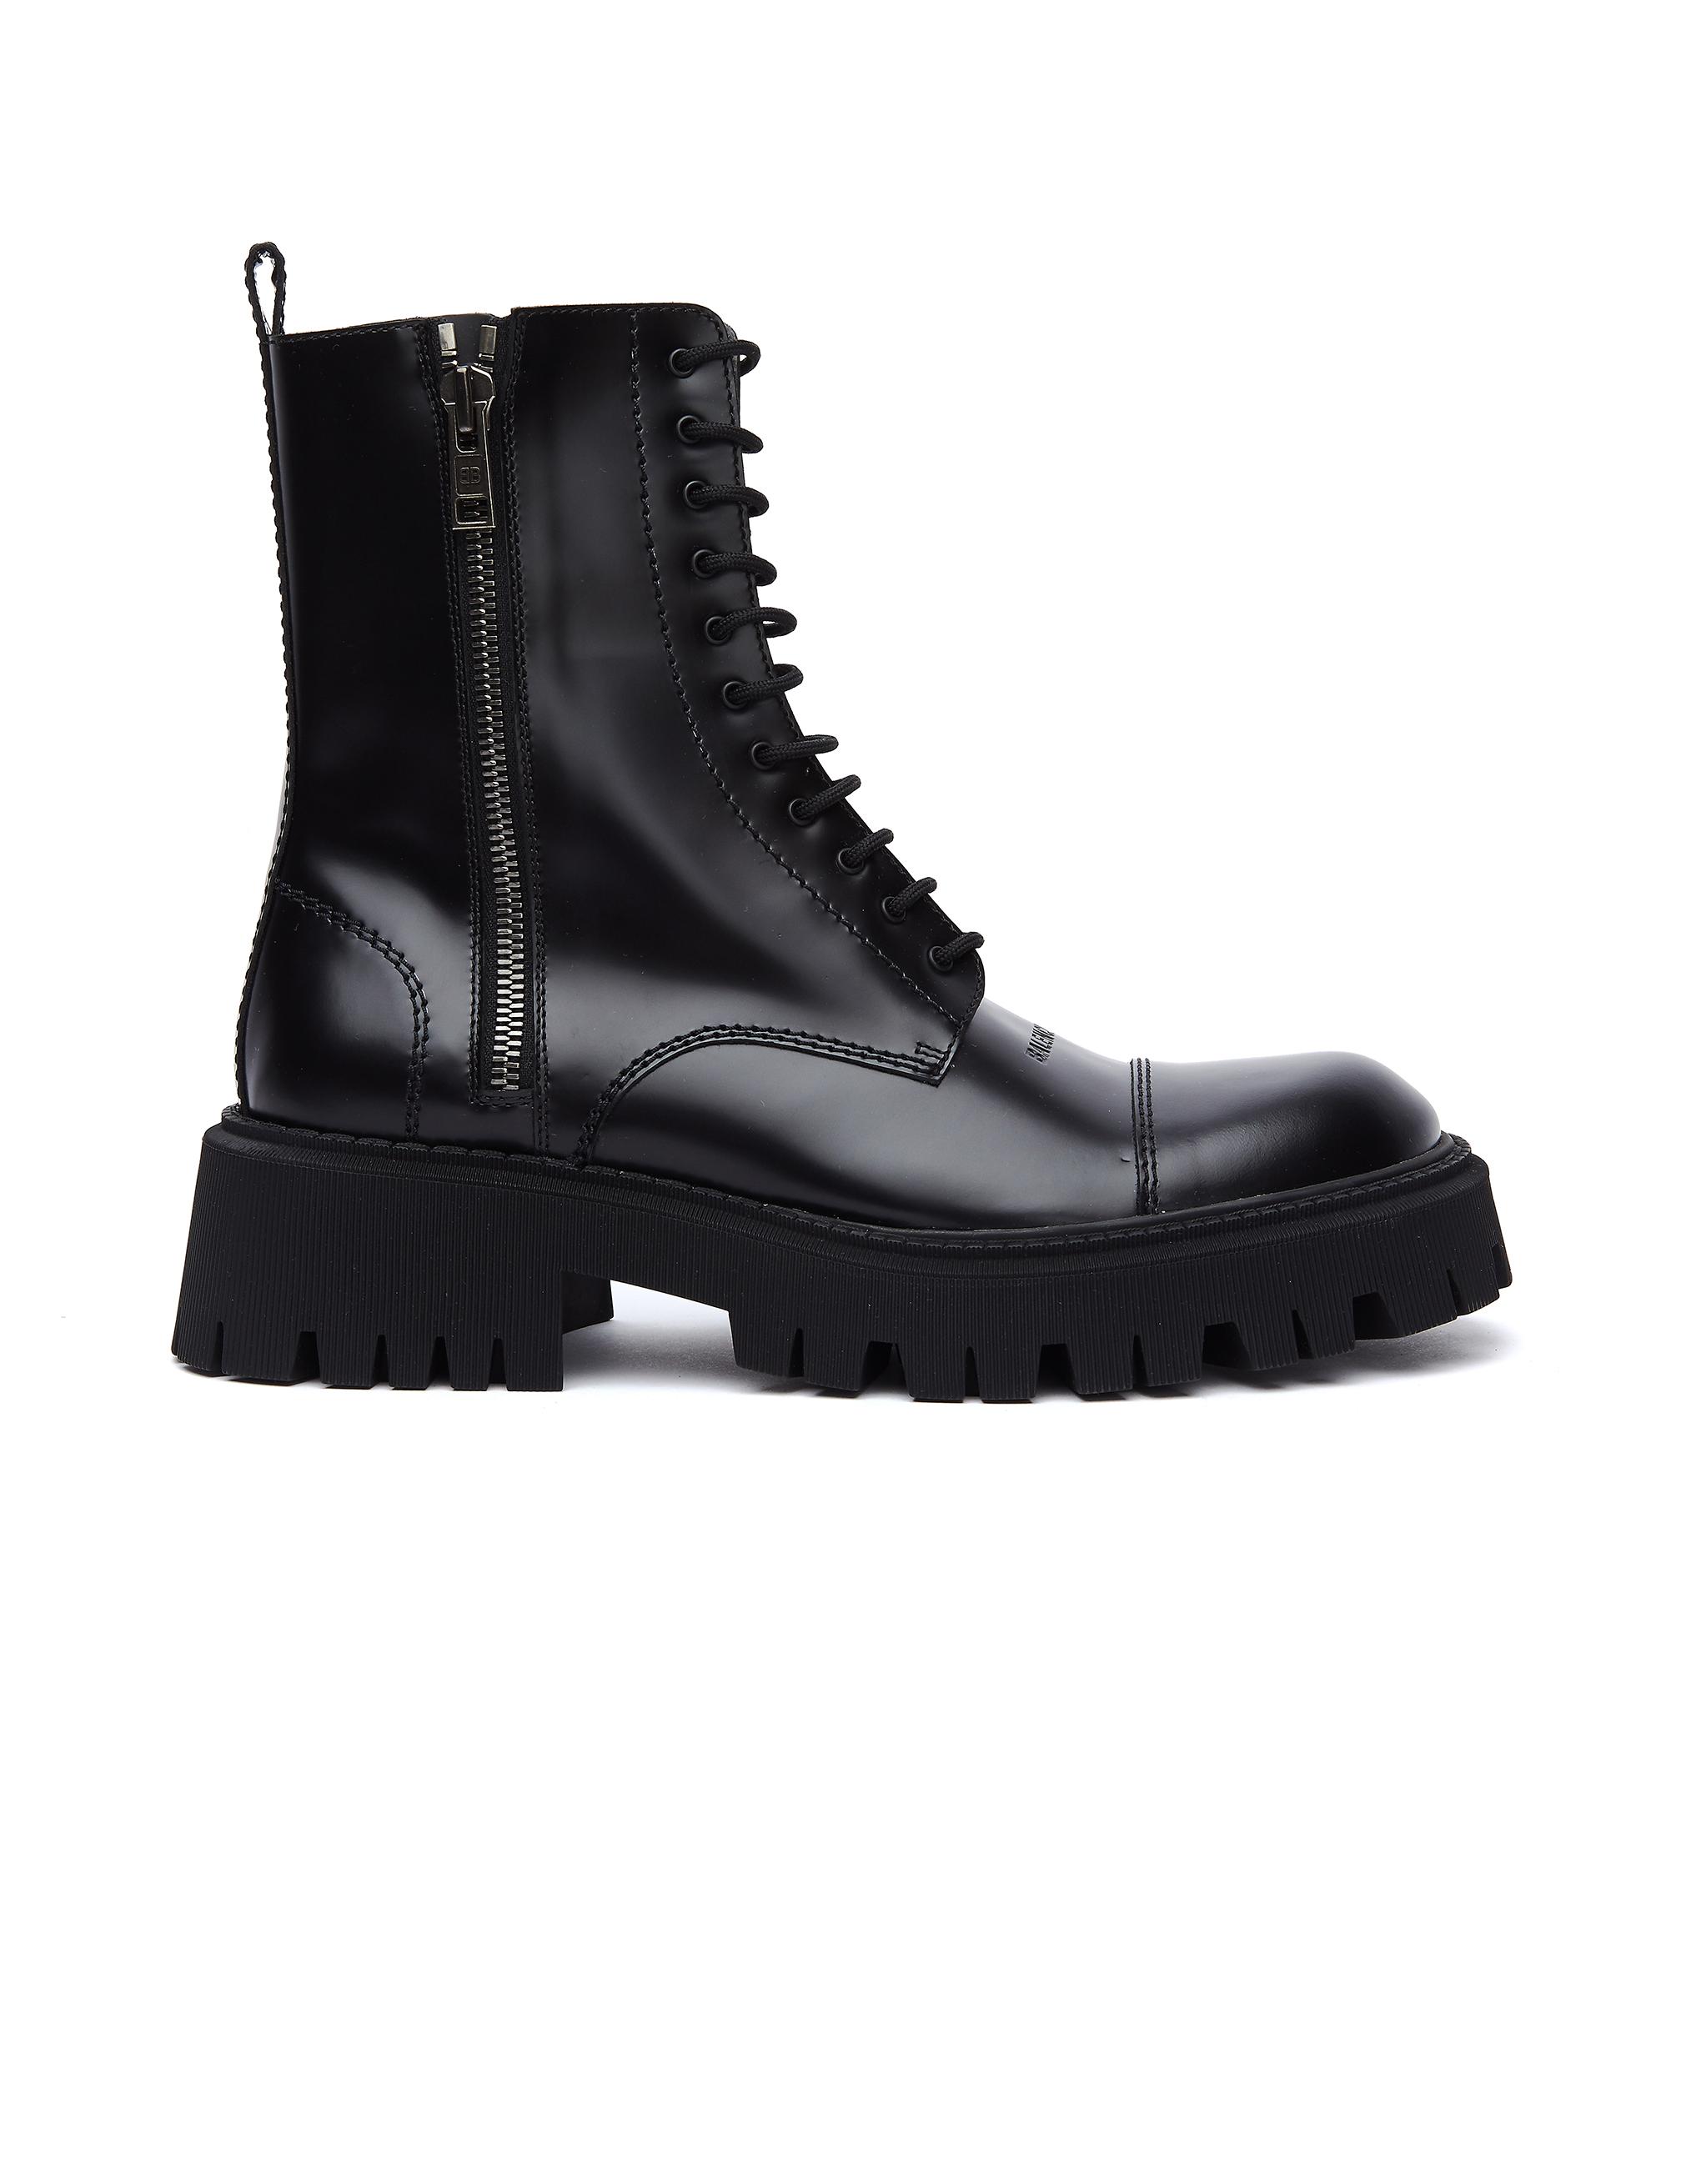 Balenciaga Tractor Boots In Black Leather for Men - Lyst